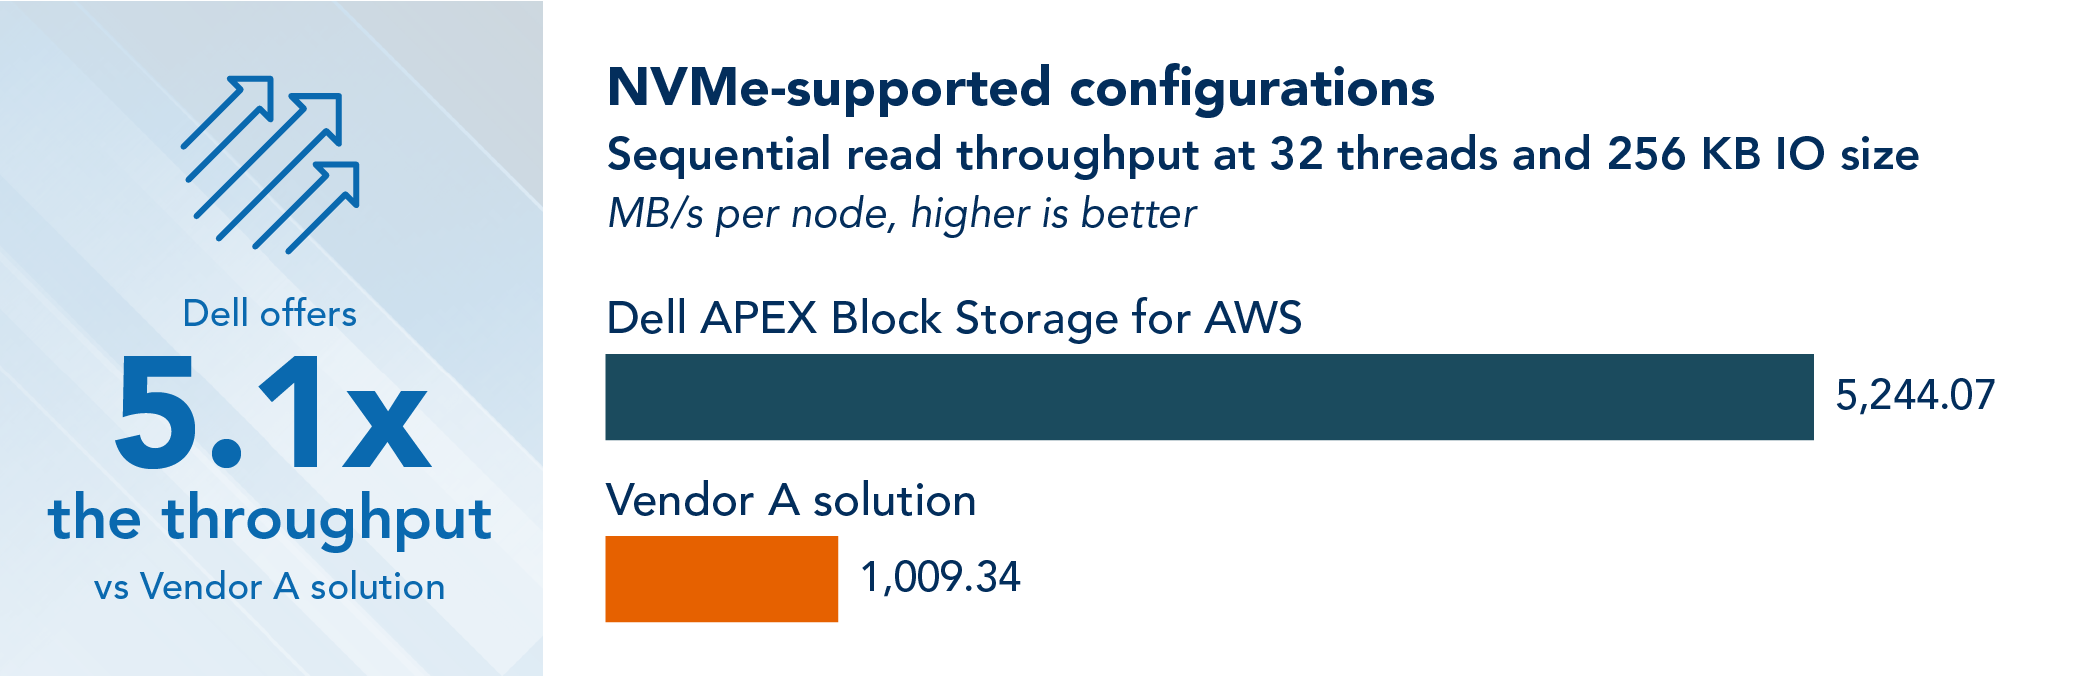 Comparison of sequential read throughput at 32 threads and 256 KB I/O size for Dell APEX Block Storage for AWS and the Vendor A solution in their NVMe-supported configurations, where higher is better. Dell APEX Block Storage for AWS achieved 5,244.07 MB/s per node, and the Vendor A solution achieved 1,009.34 MB/s per node. Dell offers 5.1x the throughput vs. Vendor A solution.